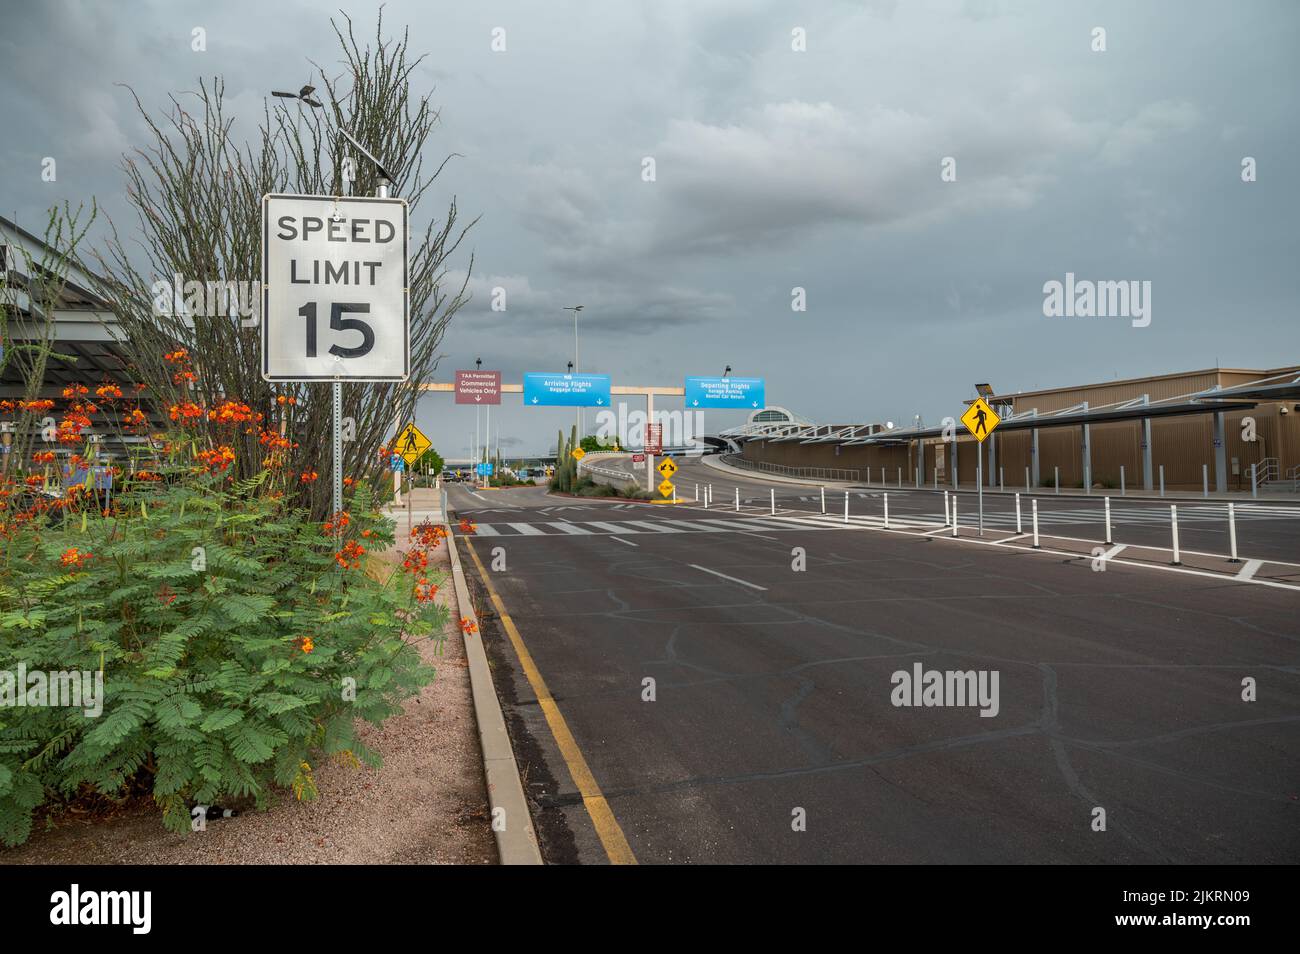 Directional signs display at Tucson airport Stock Photo